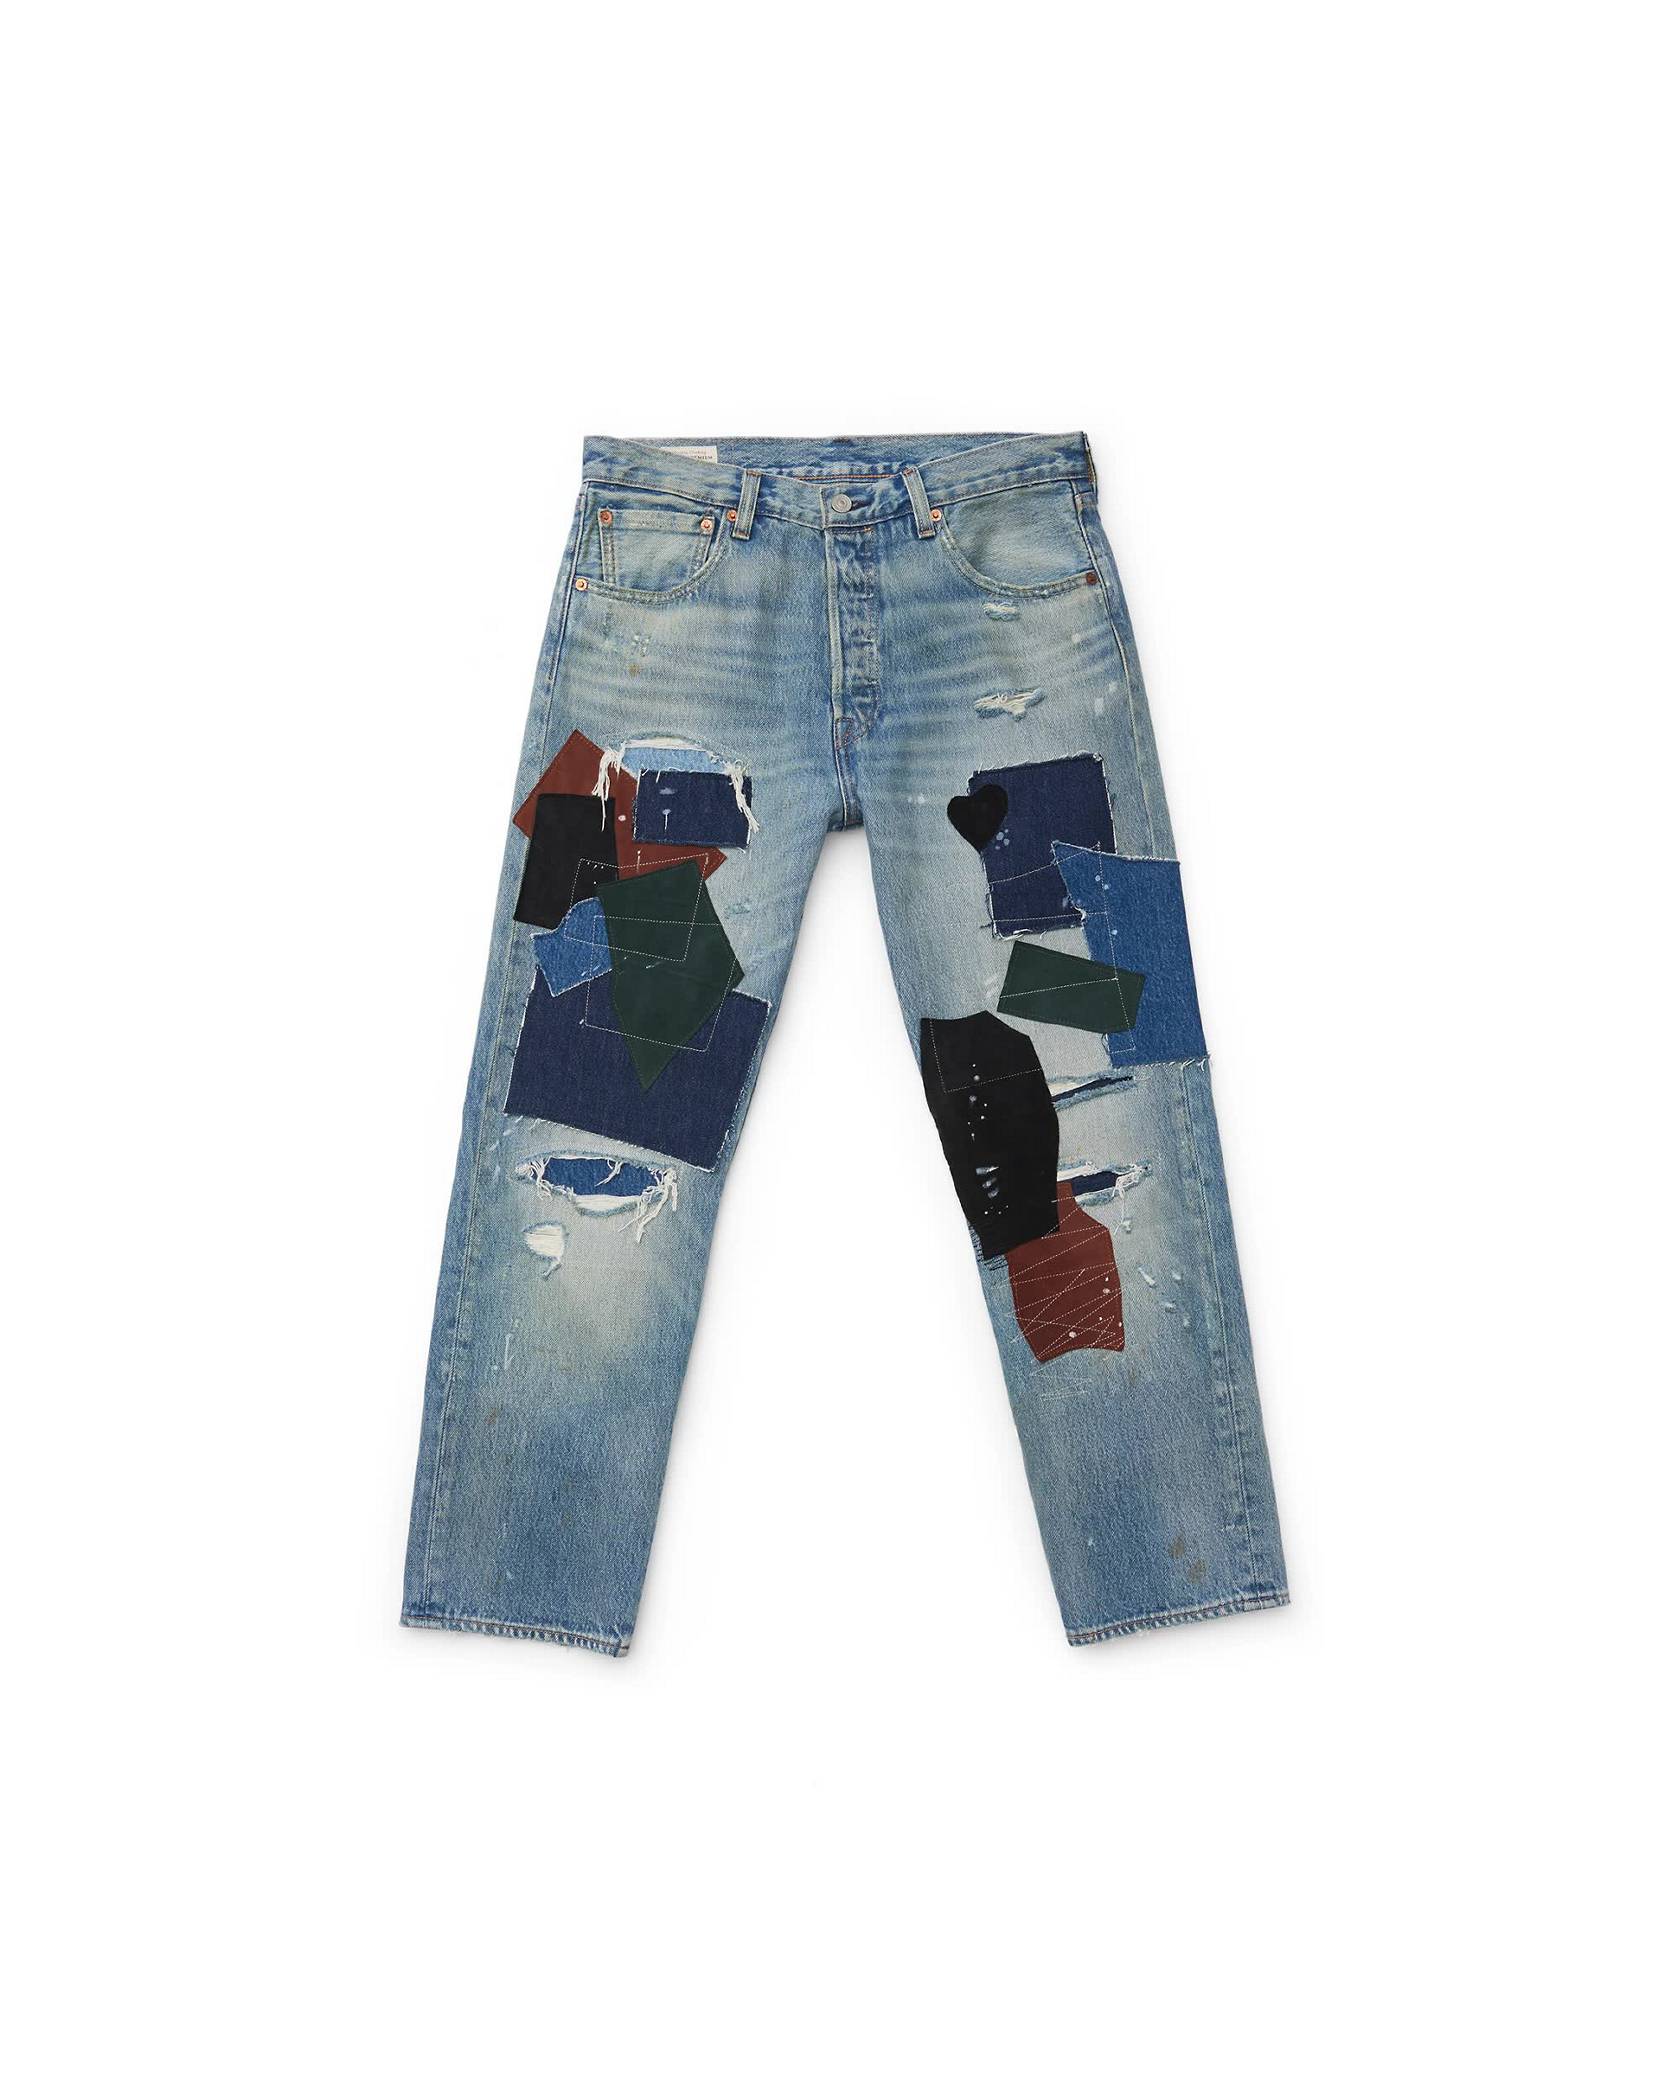 GIF of different 501 jeans from over the years.